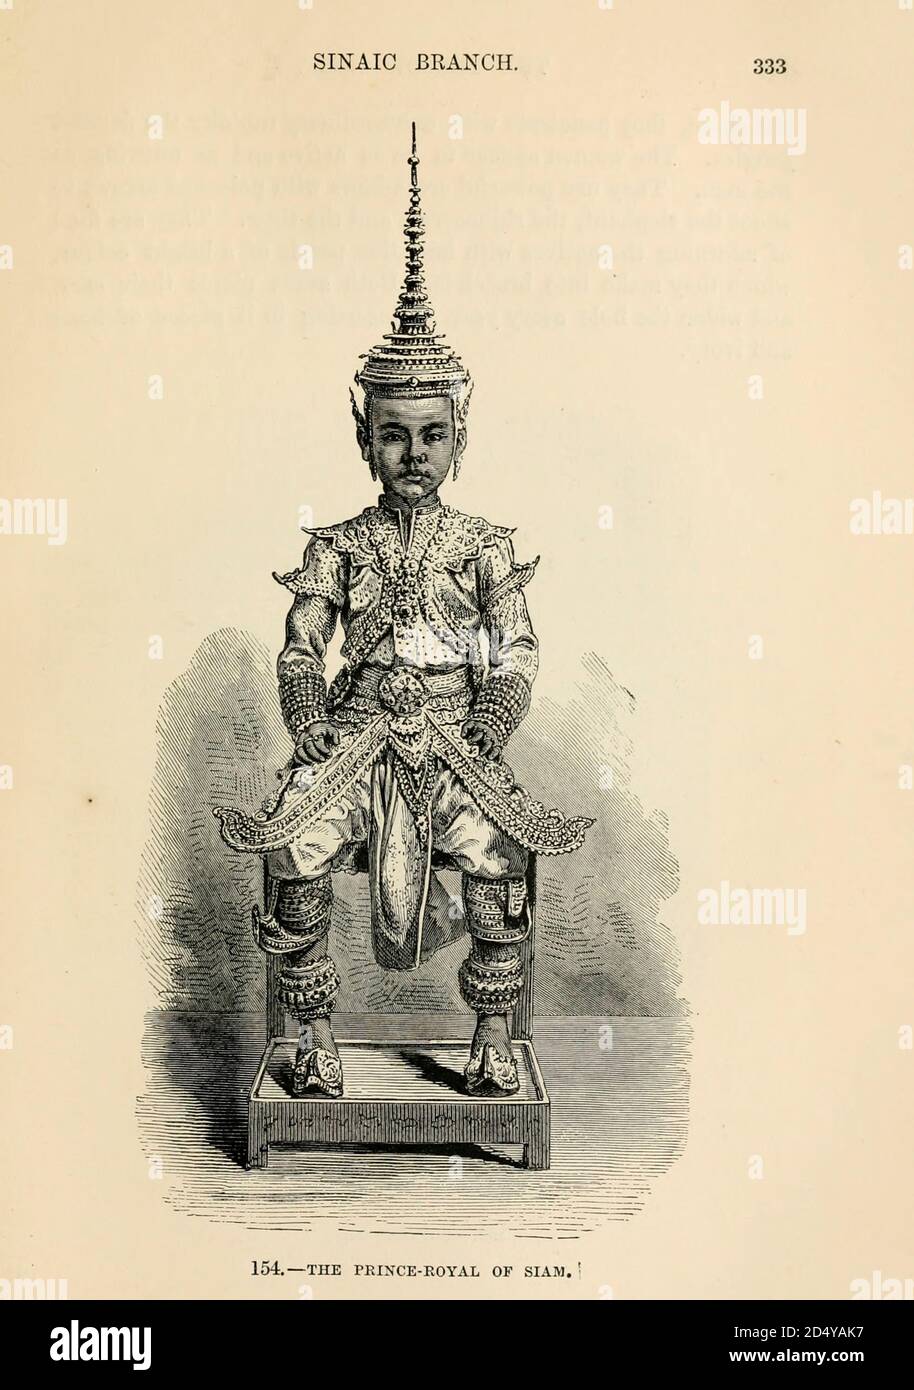 The Prince Royal of Siam engraving on wood From The human race by Figuier, Louis, (1819-1894) Publication in 1872 Publisher: New York, Appleton Stock Photo